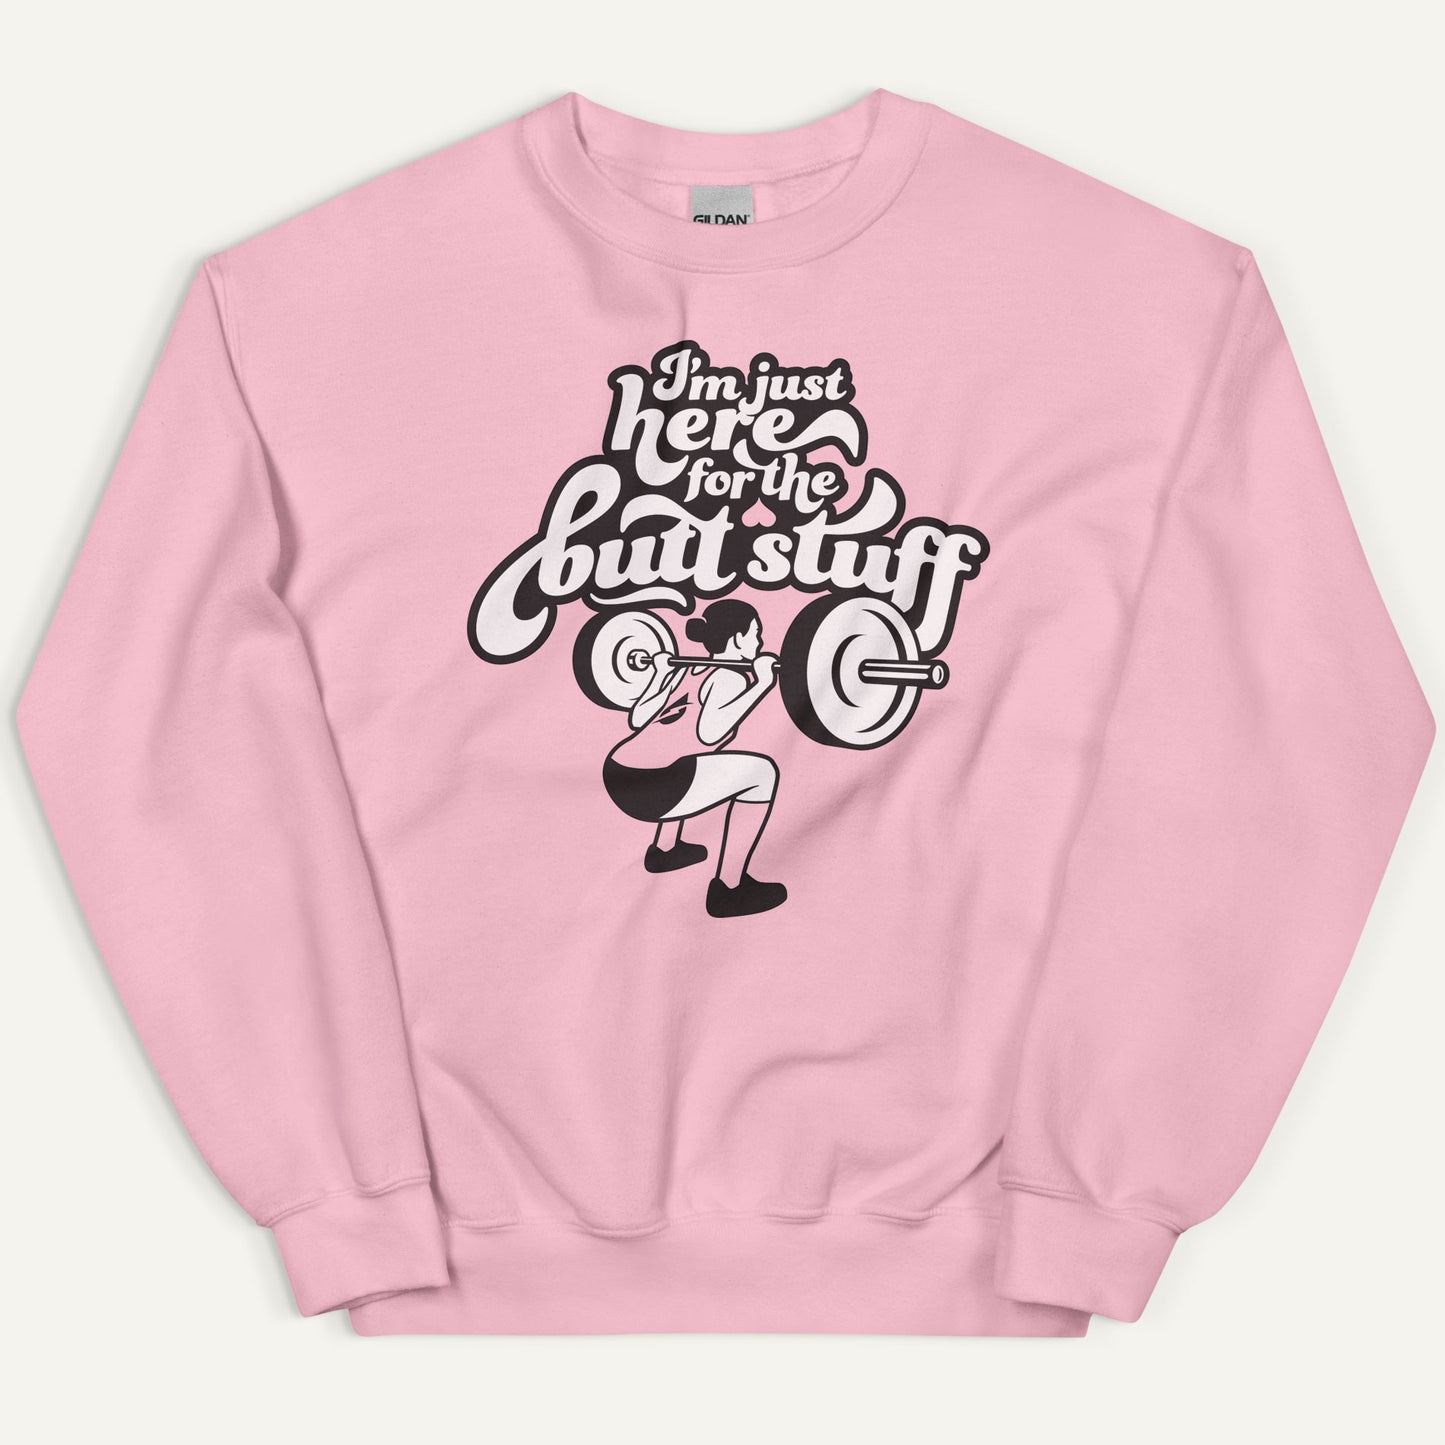 I'm Just Here For The Butt Stuff Sweatshirt